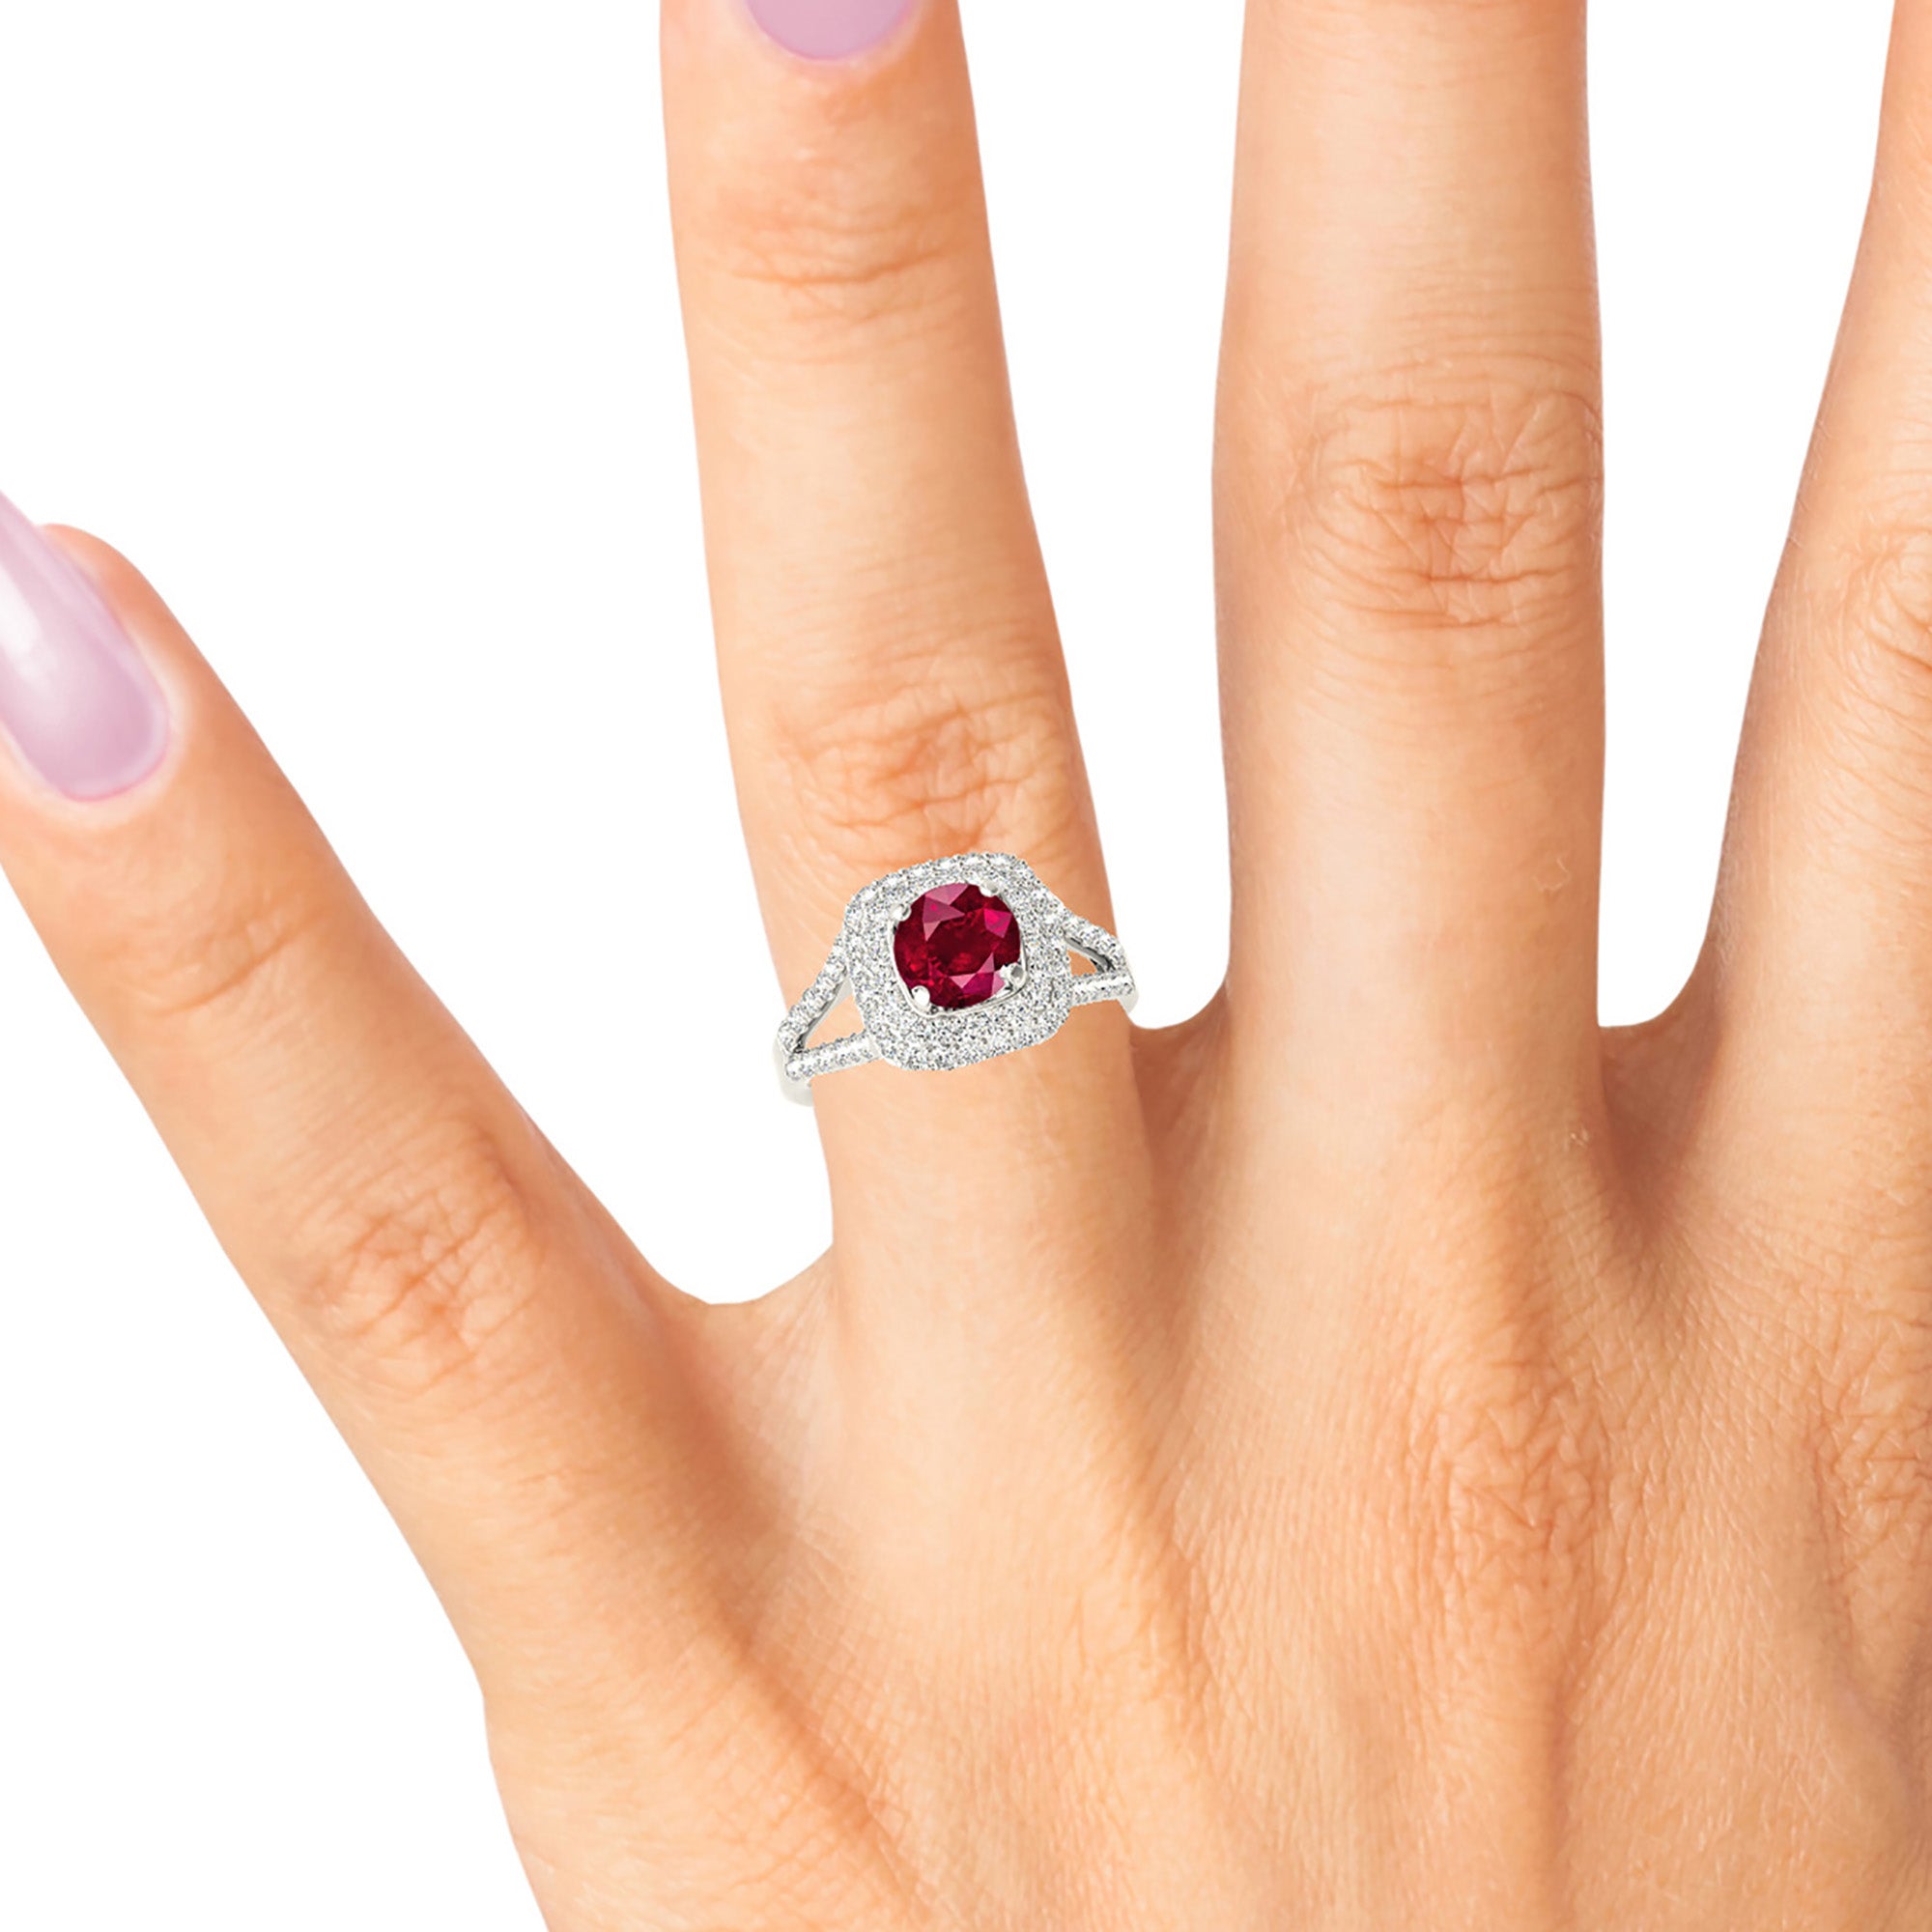 1.35 ct. Genuine Ruby Ring with 0.70 ctw. Diamond Double Row Halo And Split V Diamond Shank-in 14K/18K White, Yellow, Rose Gold and Platinum - Christmas Jewelry Gift -VIRABYANI